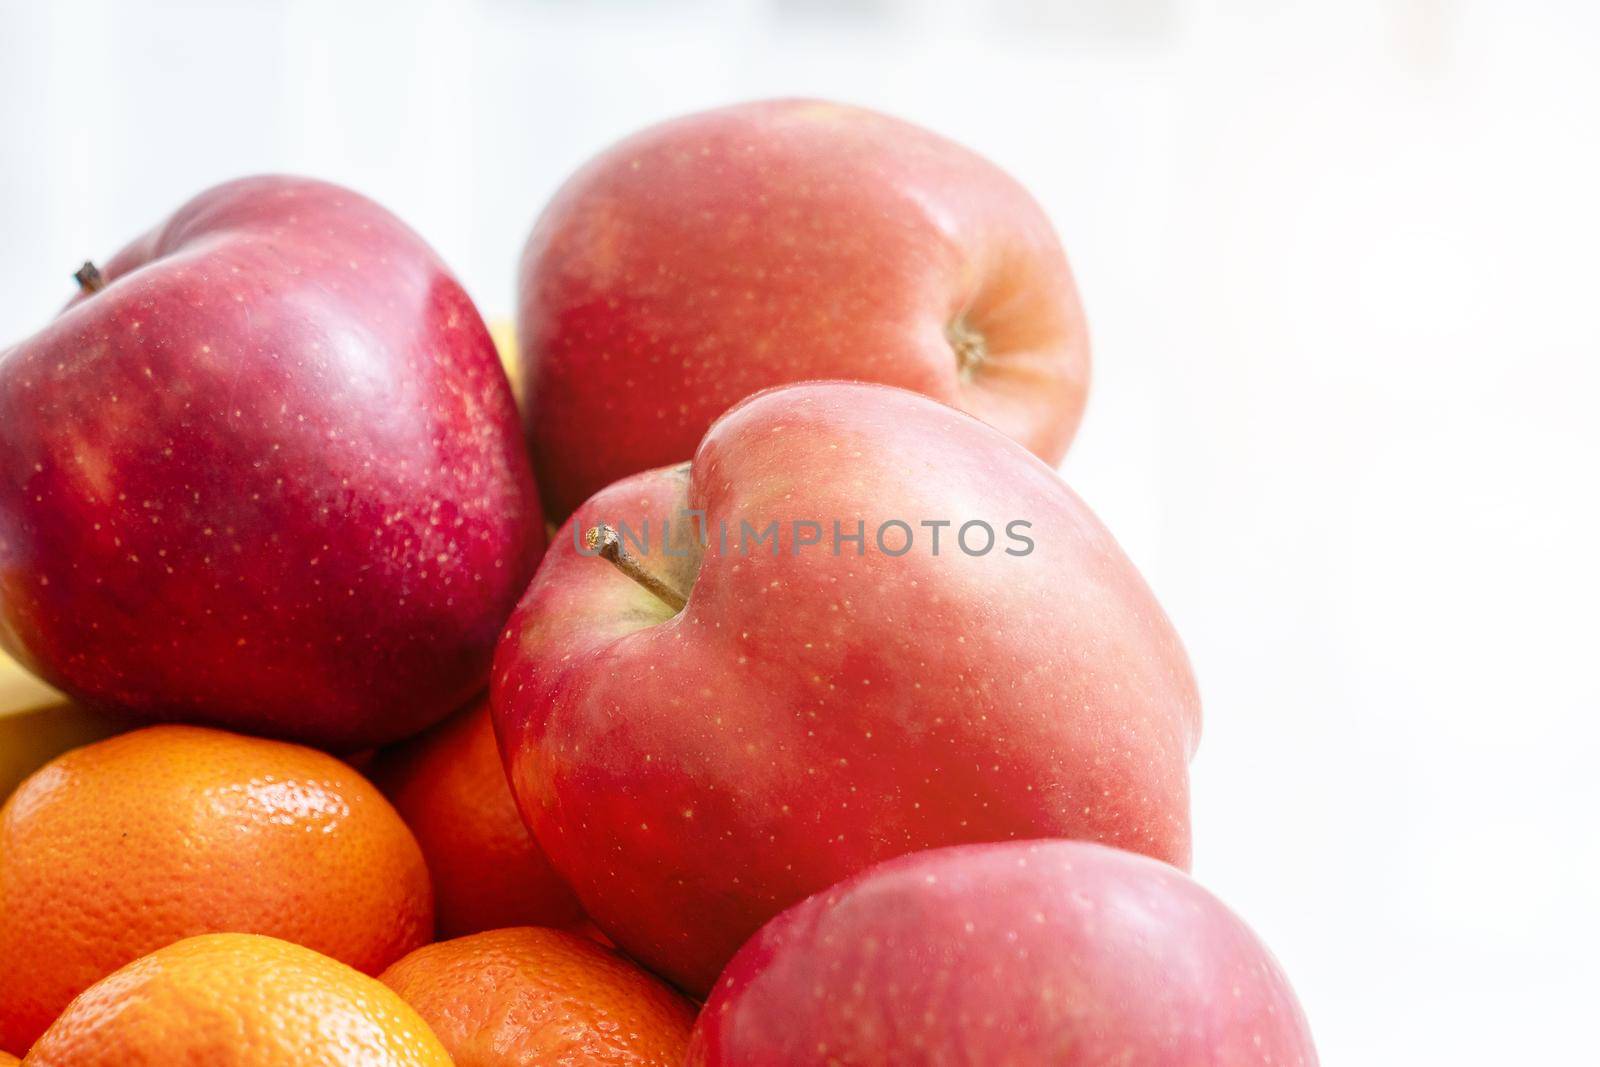 A bowl of fruit on white background. Apples and oranges by Mariakray